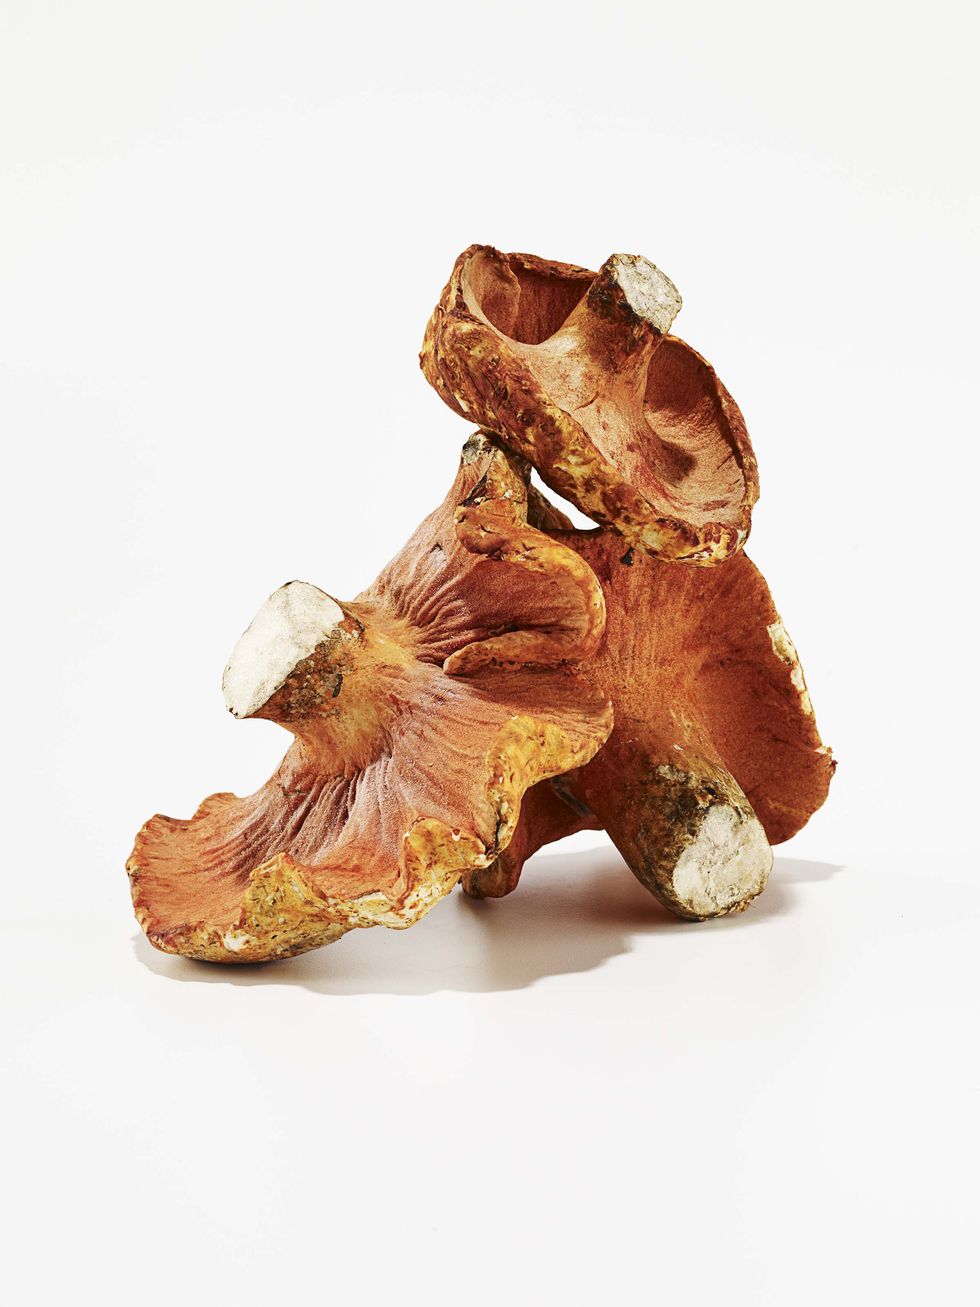 lobster mushrooms on a white background